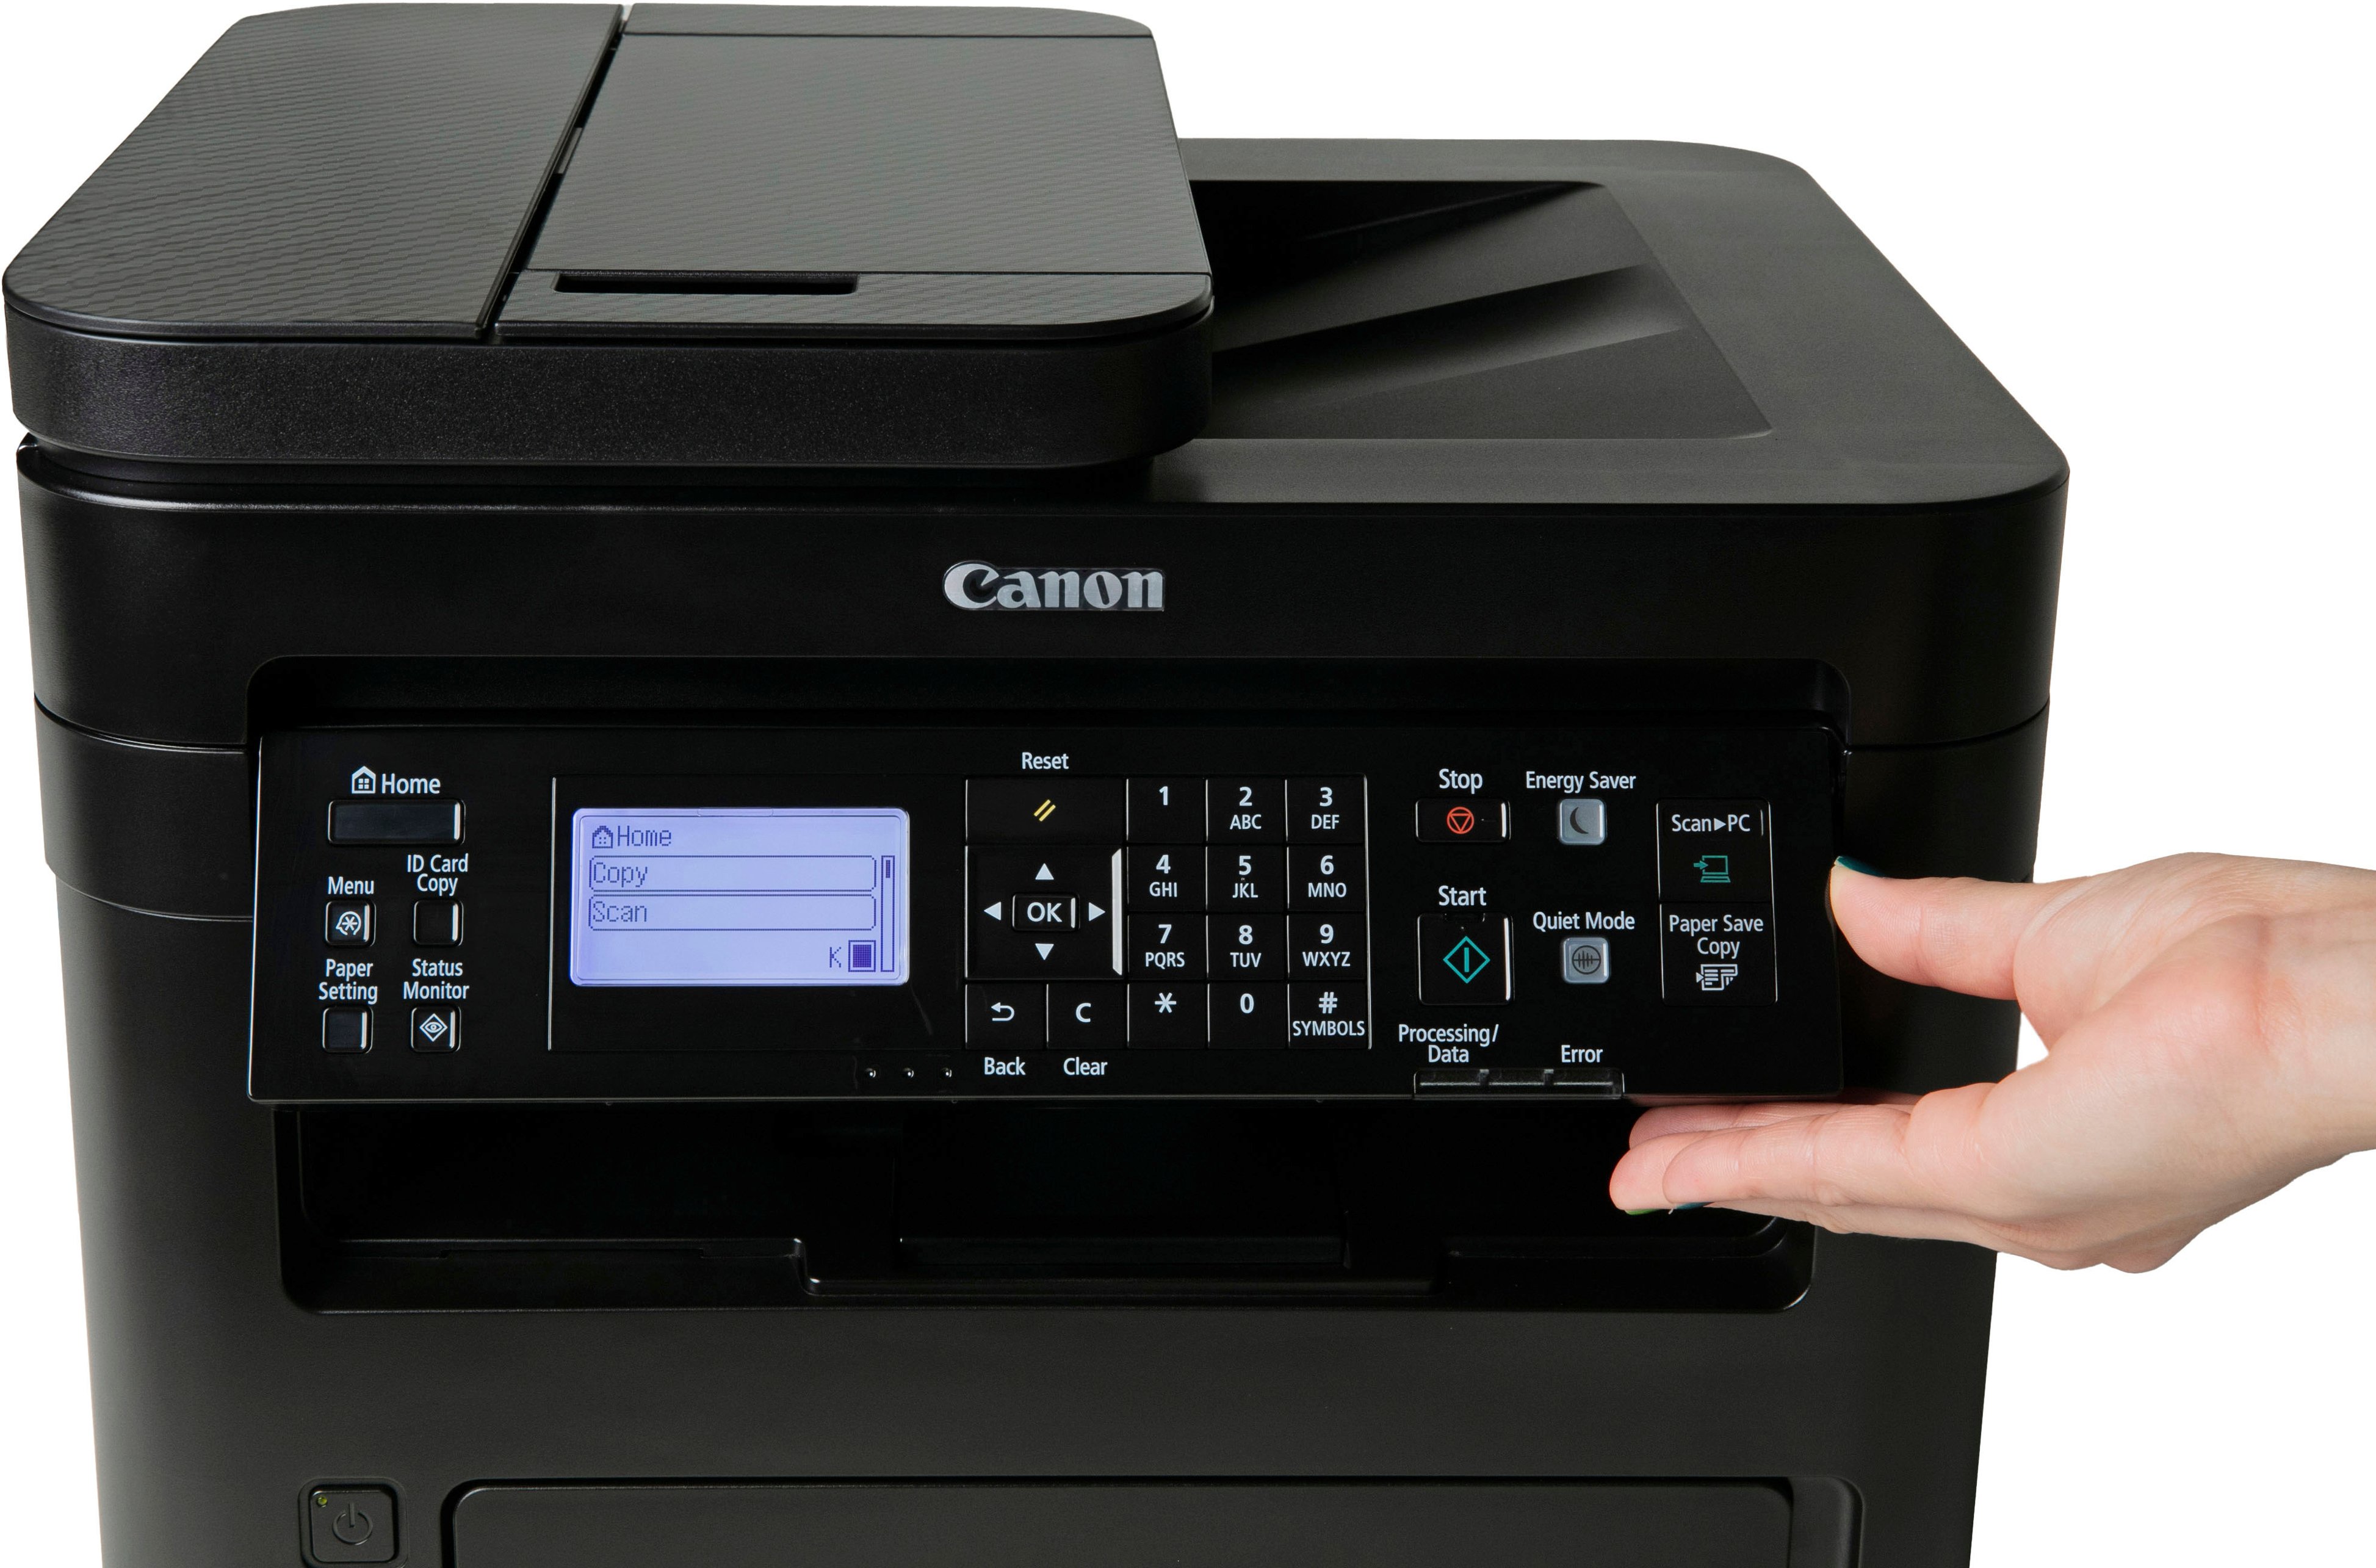 Angle View: Canon - imageCLASS MF264dw II Wireless Black-and-White All-In-One Laser Printer - Black